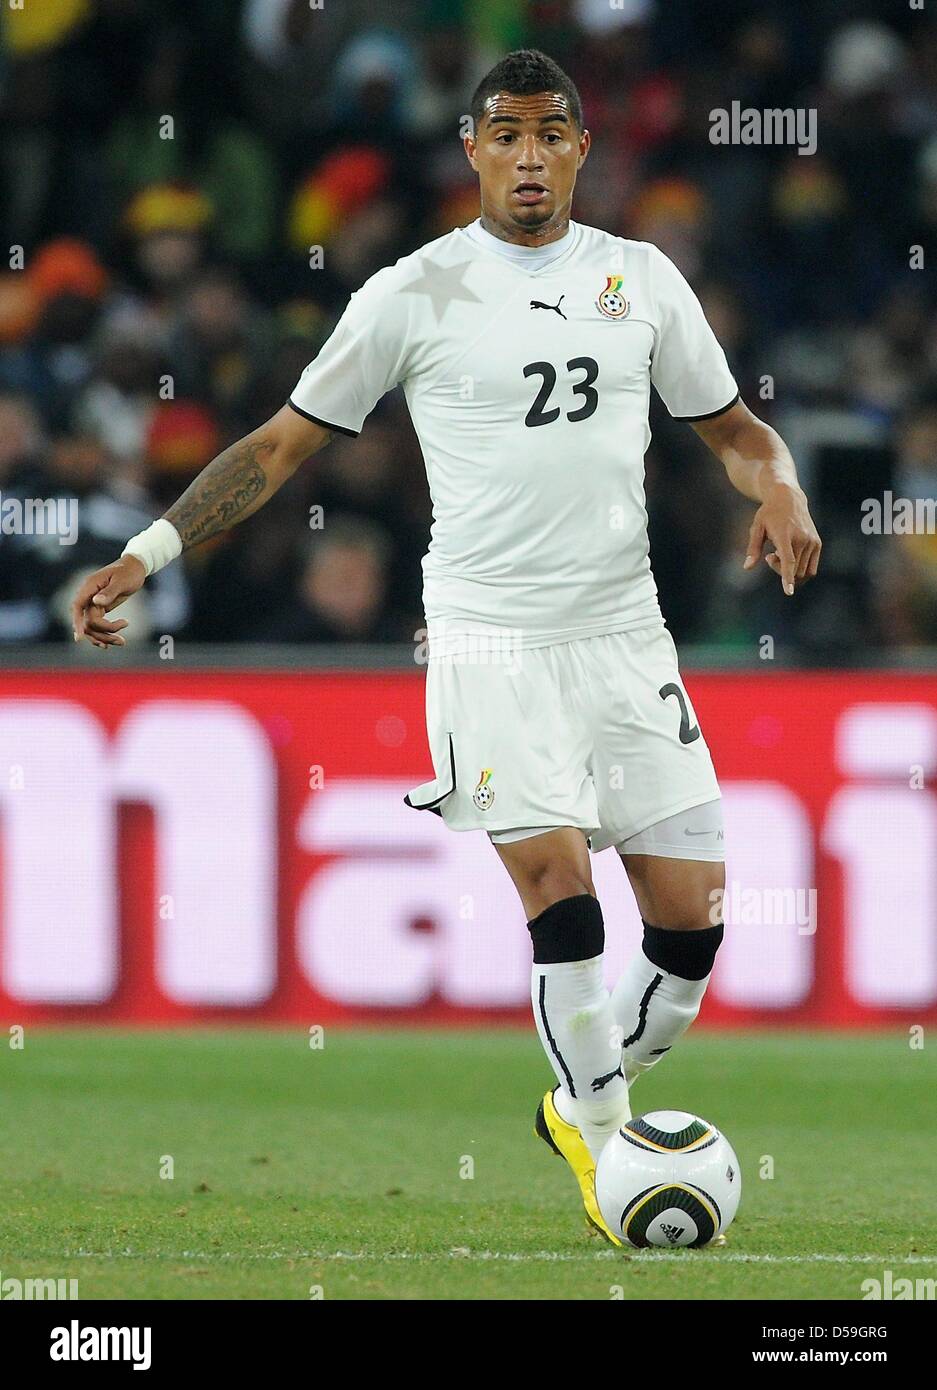 Ghana's Kevin-Prince Boateng during the 2010 FIFA World Cup group D match between Ghana and Germany at Soccer City, Johannesburg, South Africa 23 June 2010. Photo: Marcus Brandt dpa - Please refer to http://dpaq.de/FIFA-WM2010-TC Stock Photo